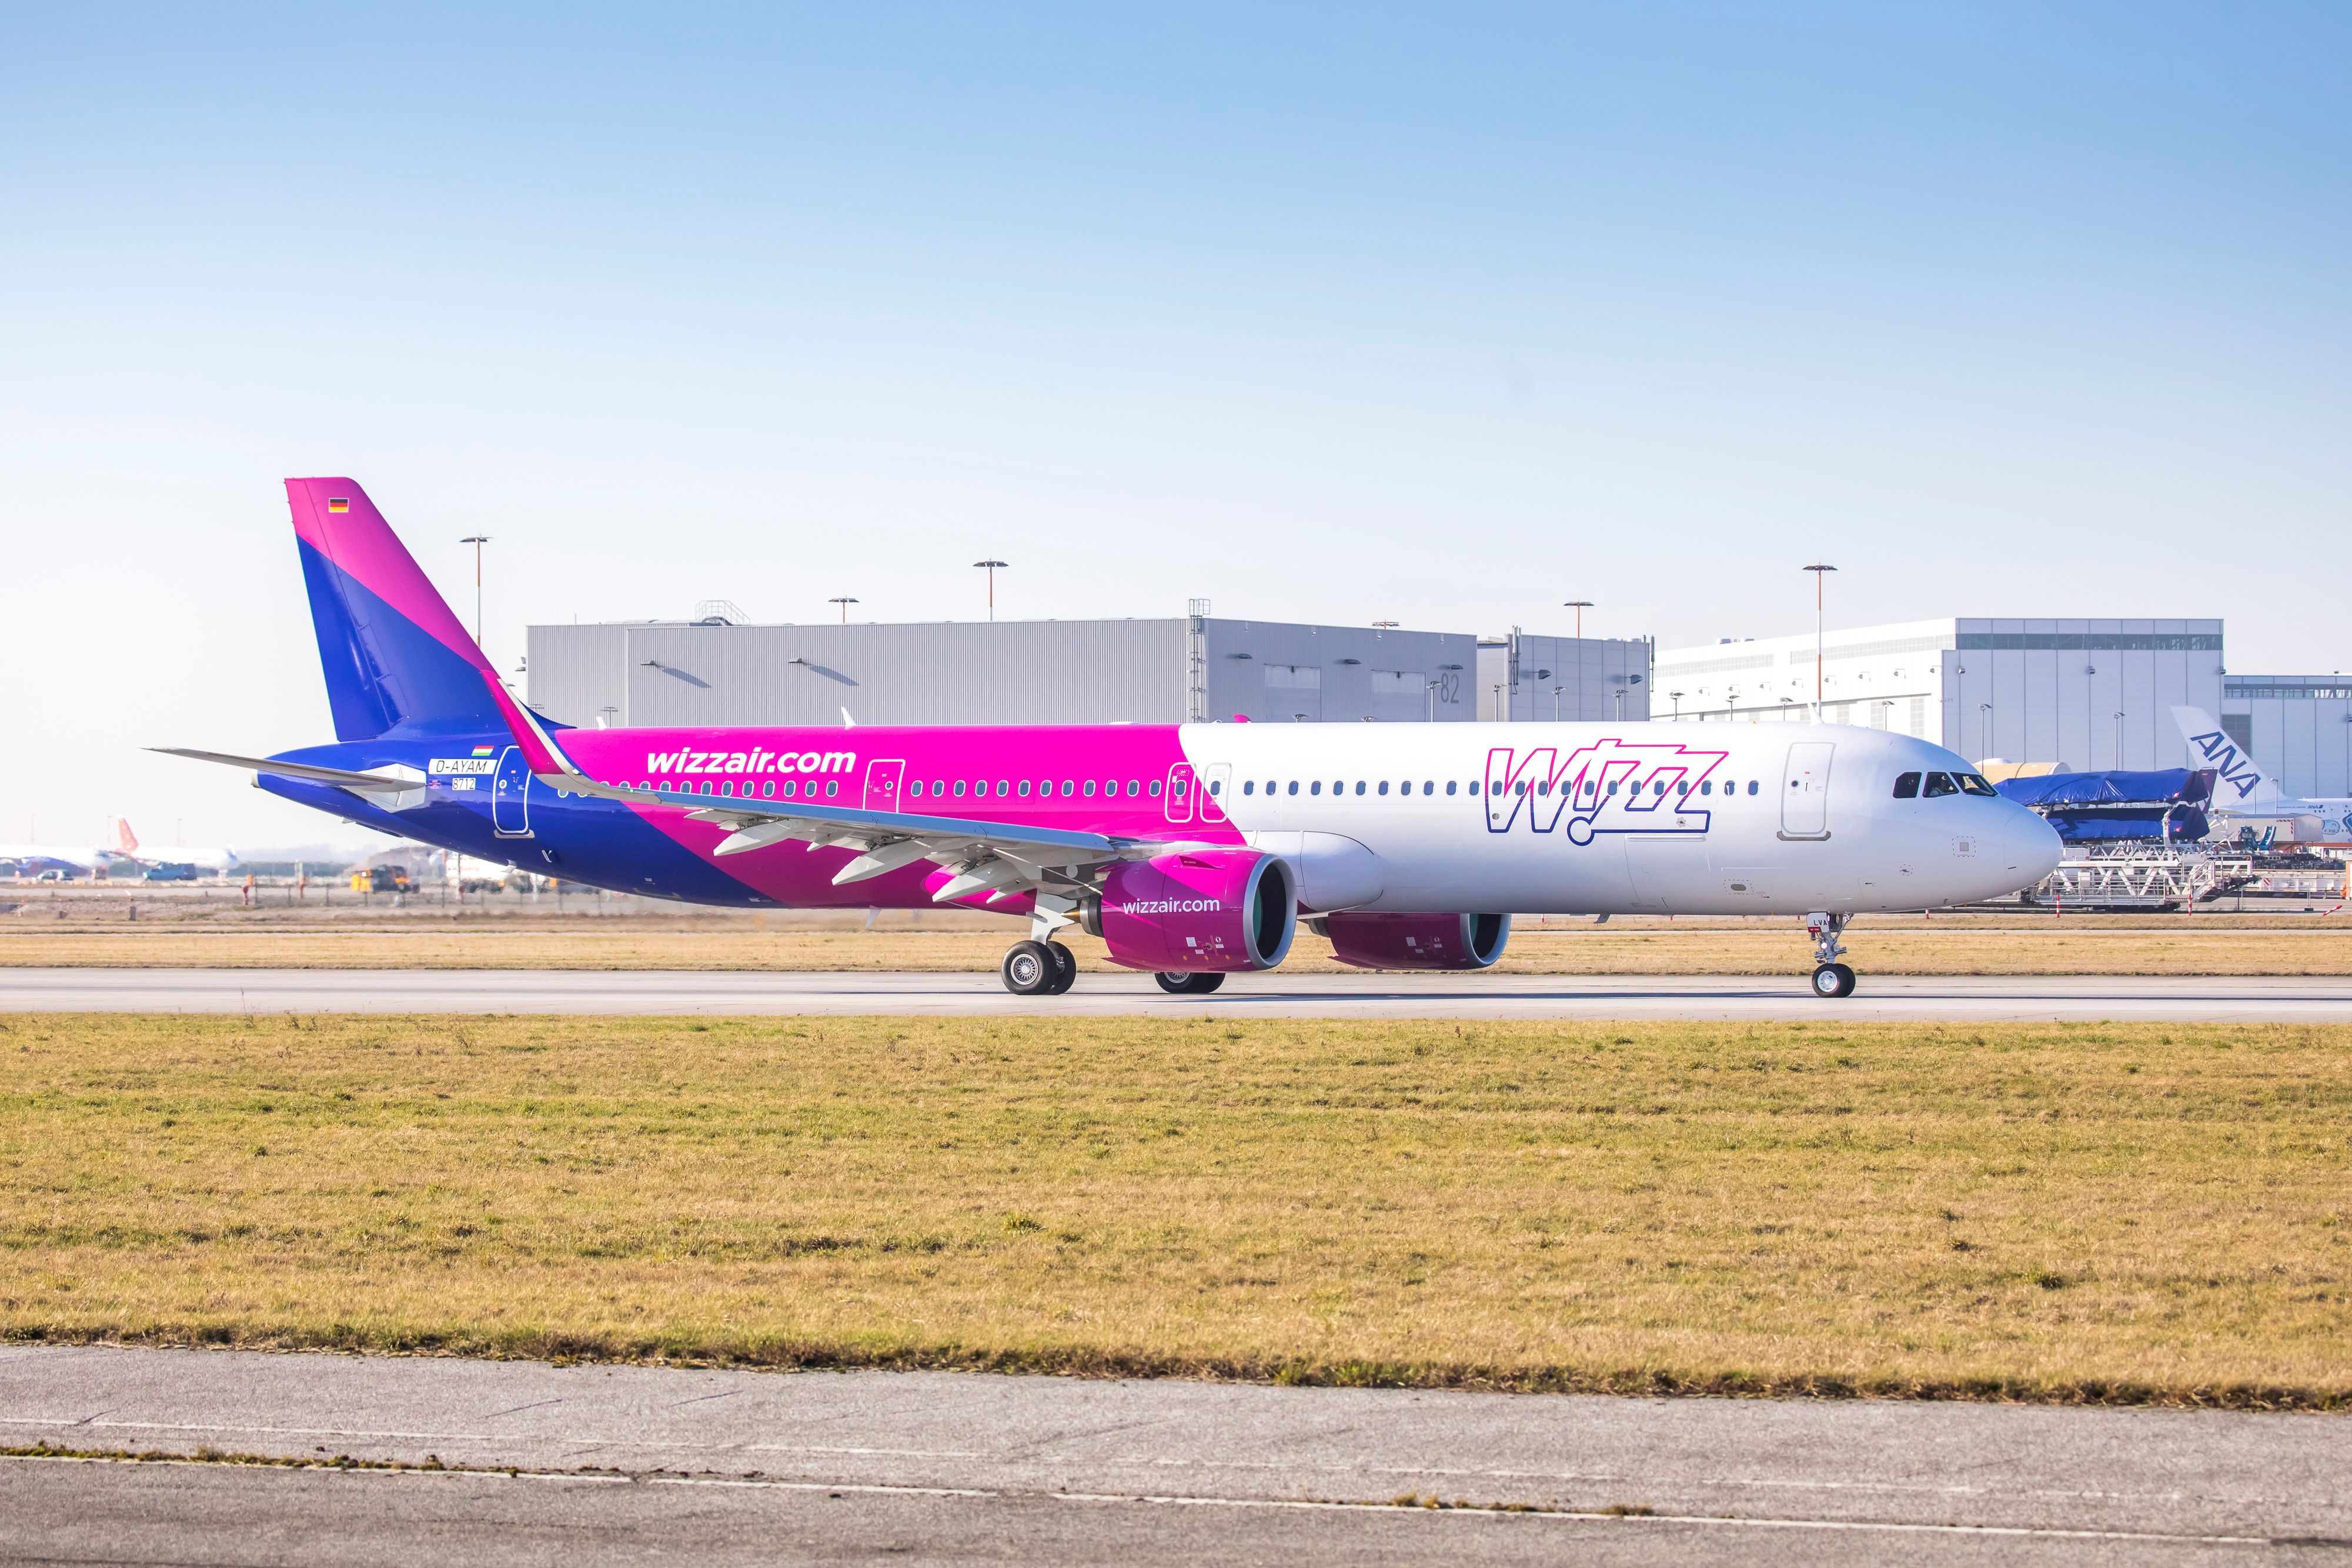 Wizz Air Airbus A321neo Taxiing In Sunny Conditions